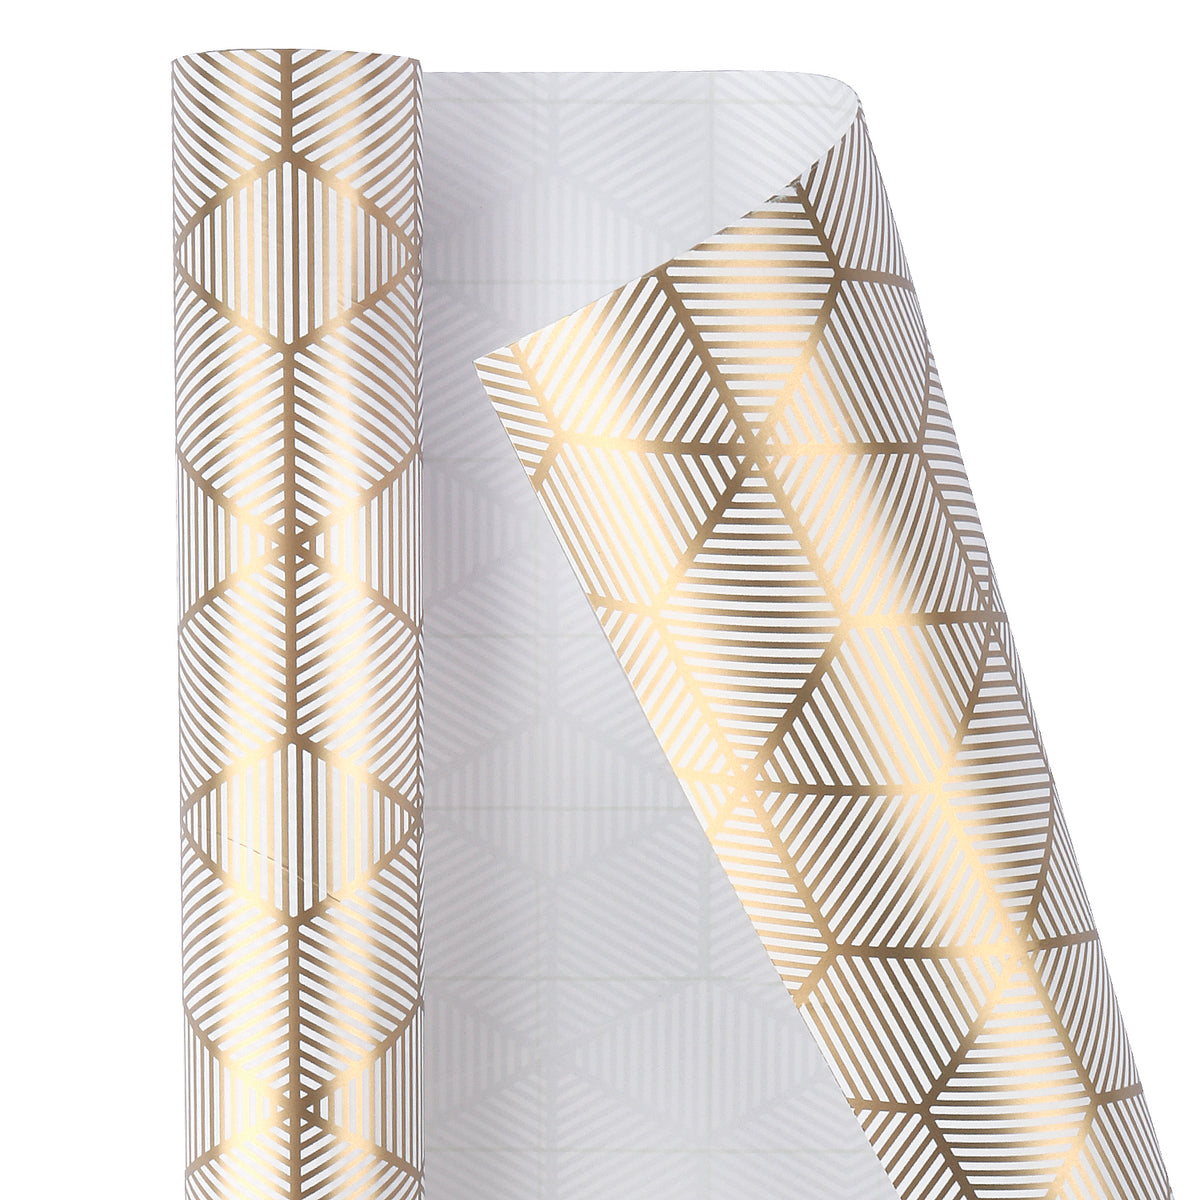 Gold Gift Wrap Wrapping Paper 24 x 15ft – CakeSupplyShop